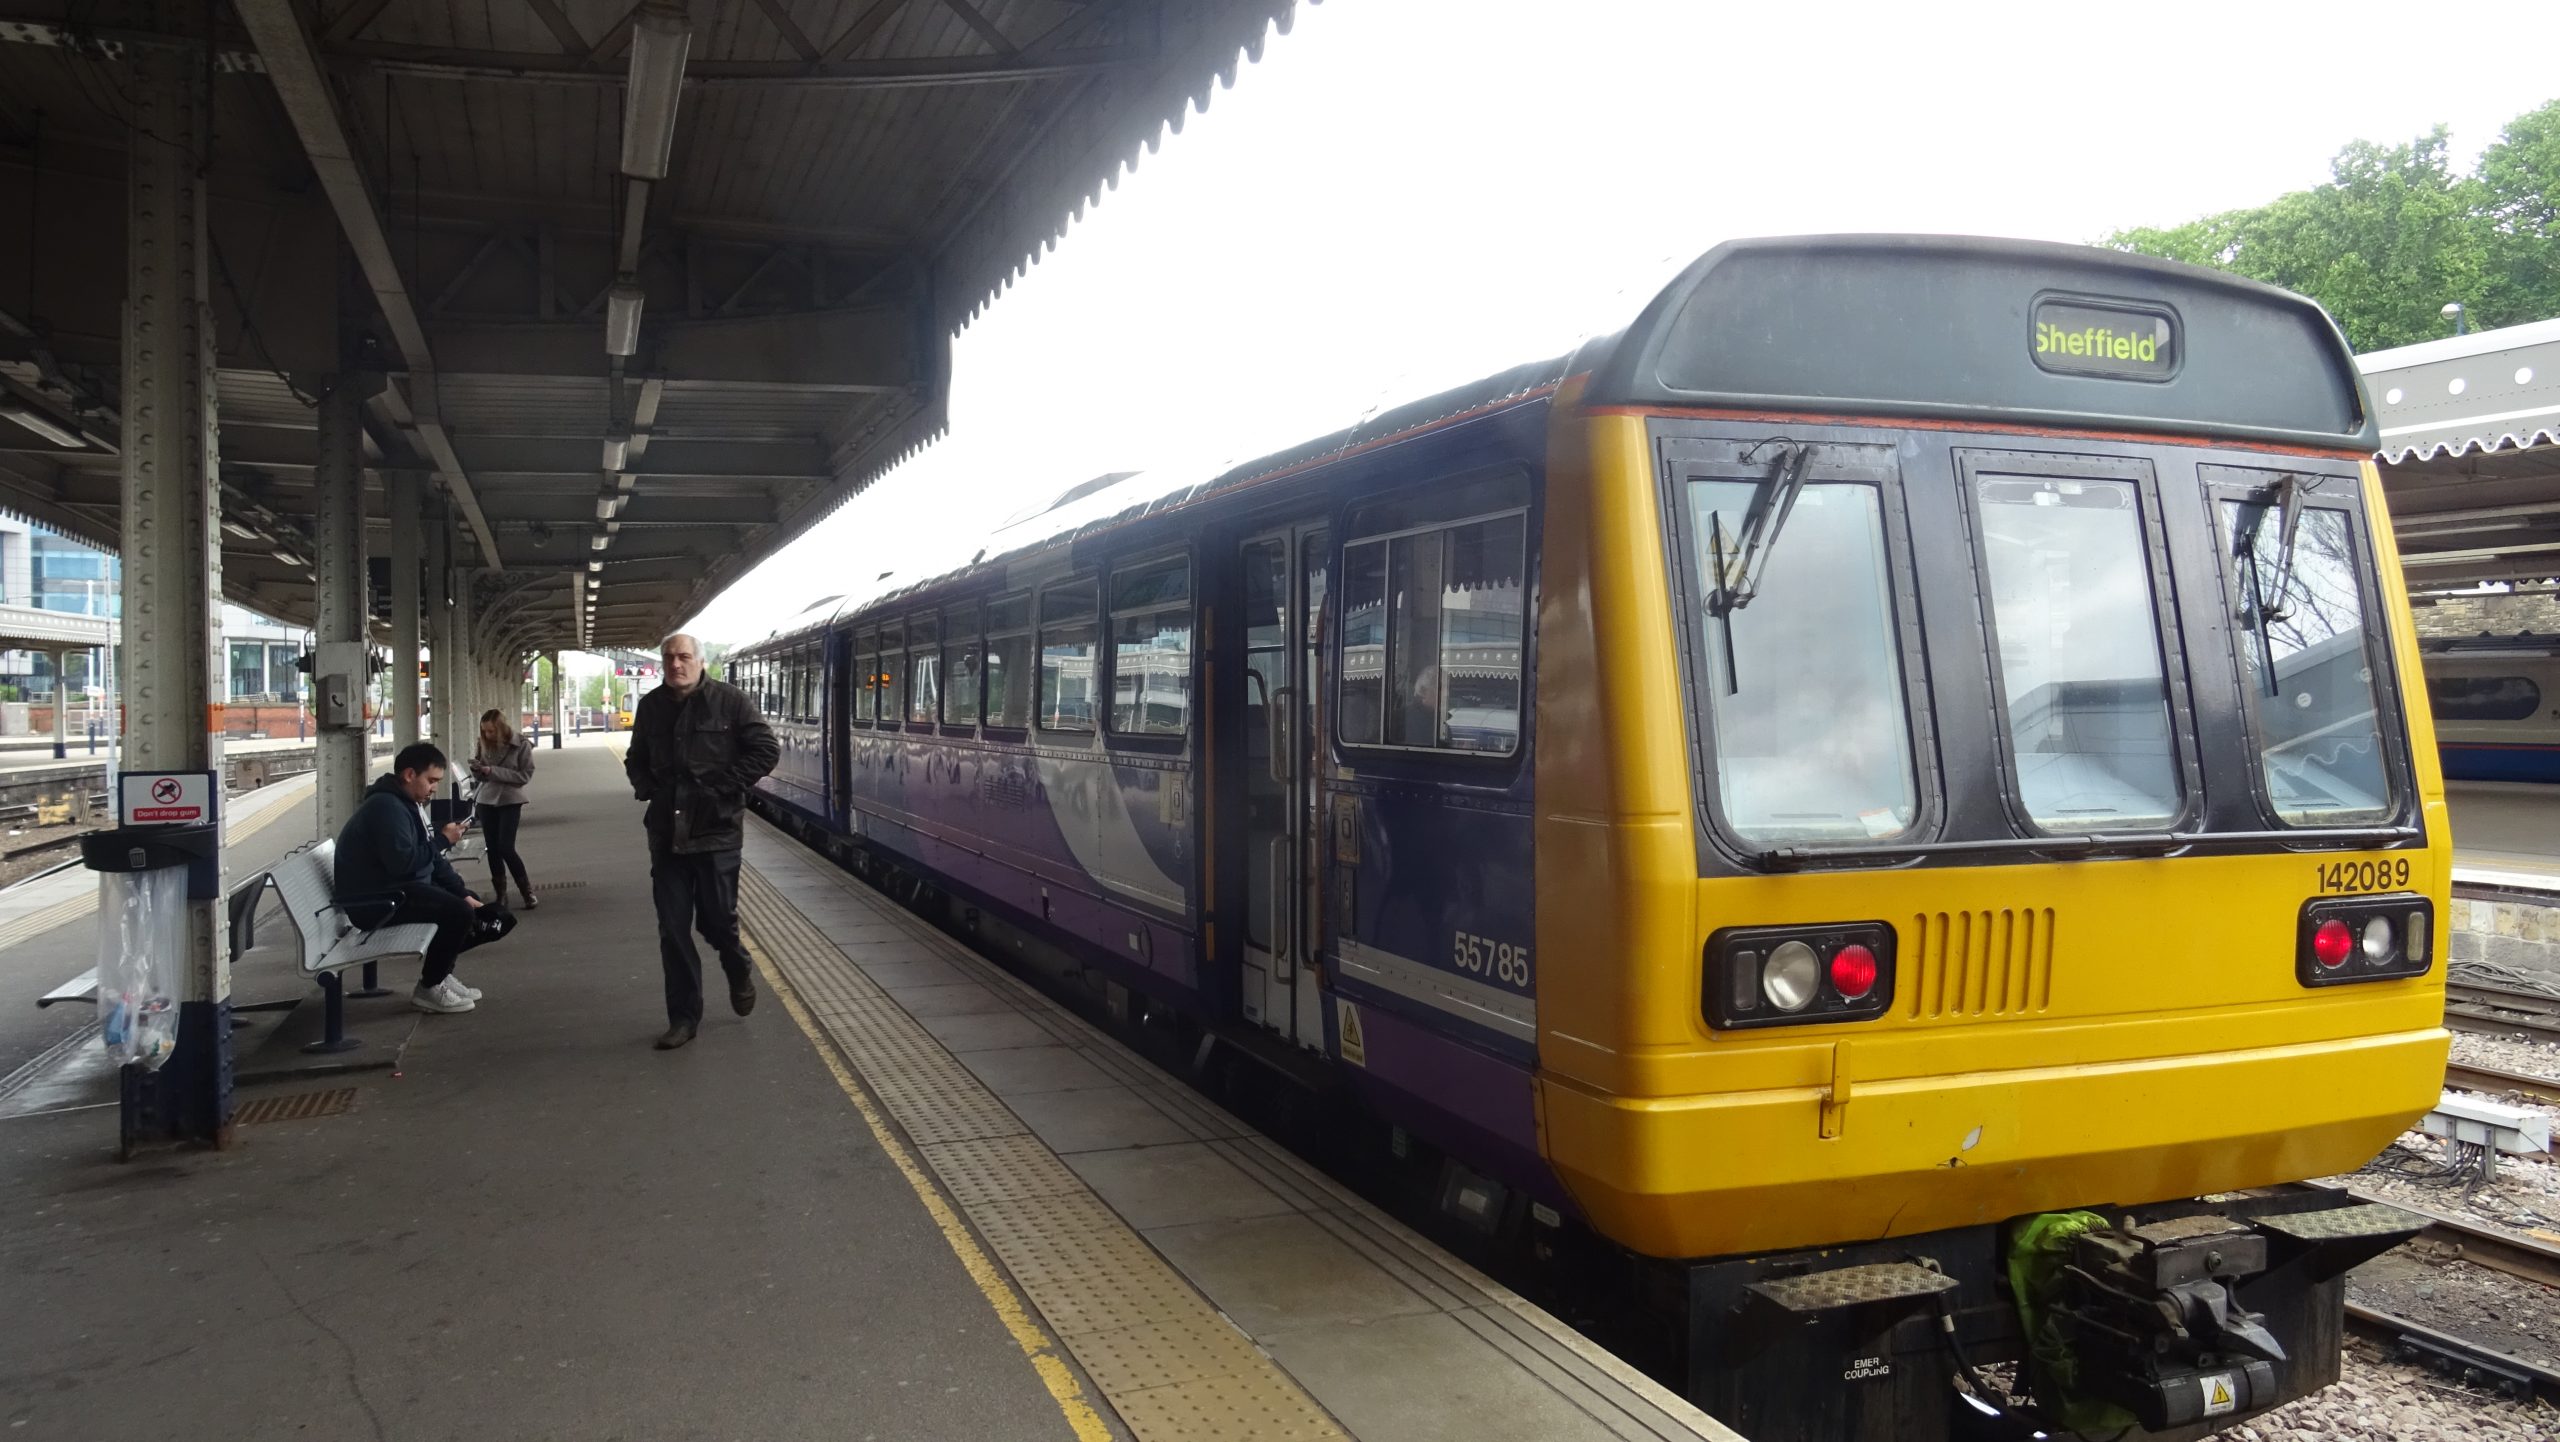 So, Northern Rail will be renationalised. Why now?